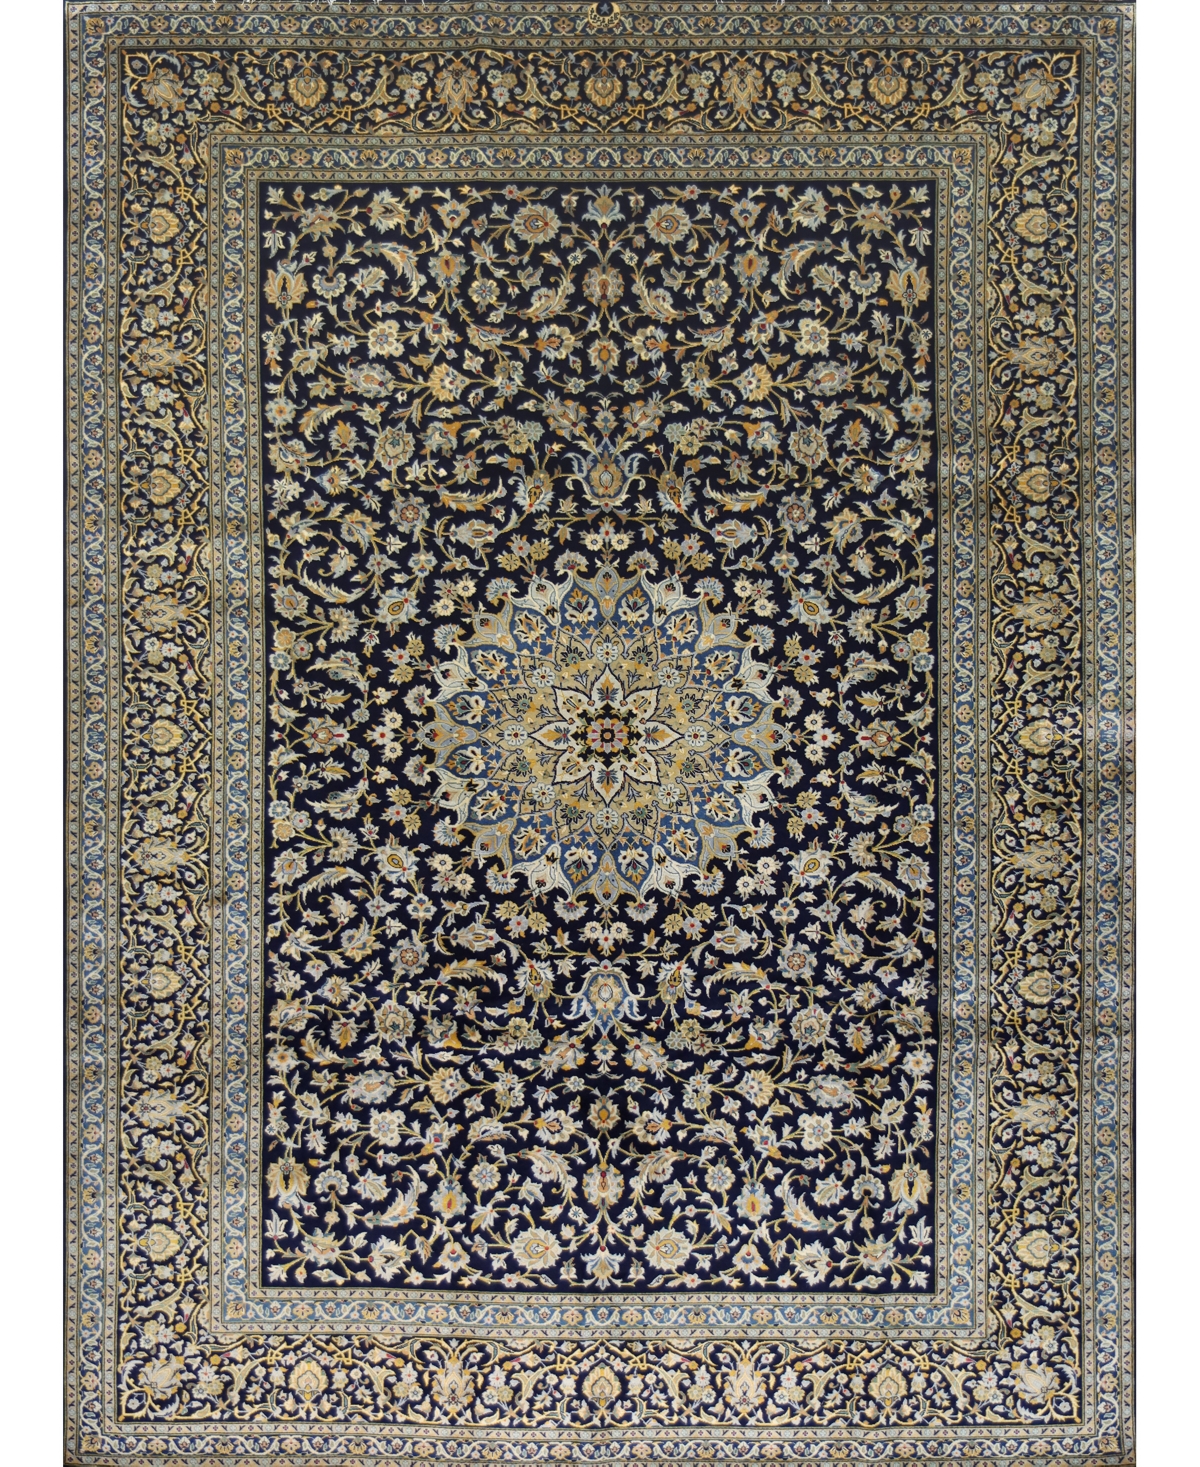 Bb Rugs One Of A Kind Kashan 9'9" X 13'9" Area Rug In Navy